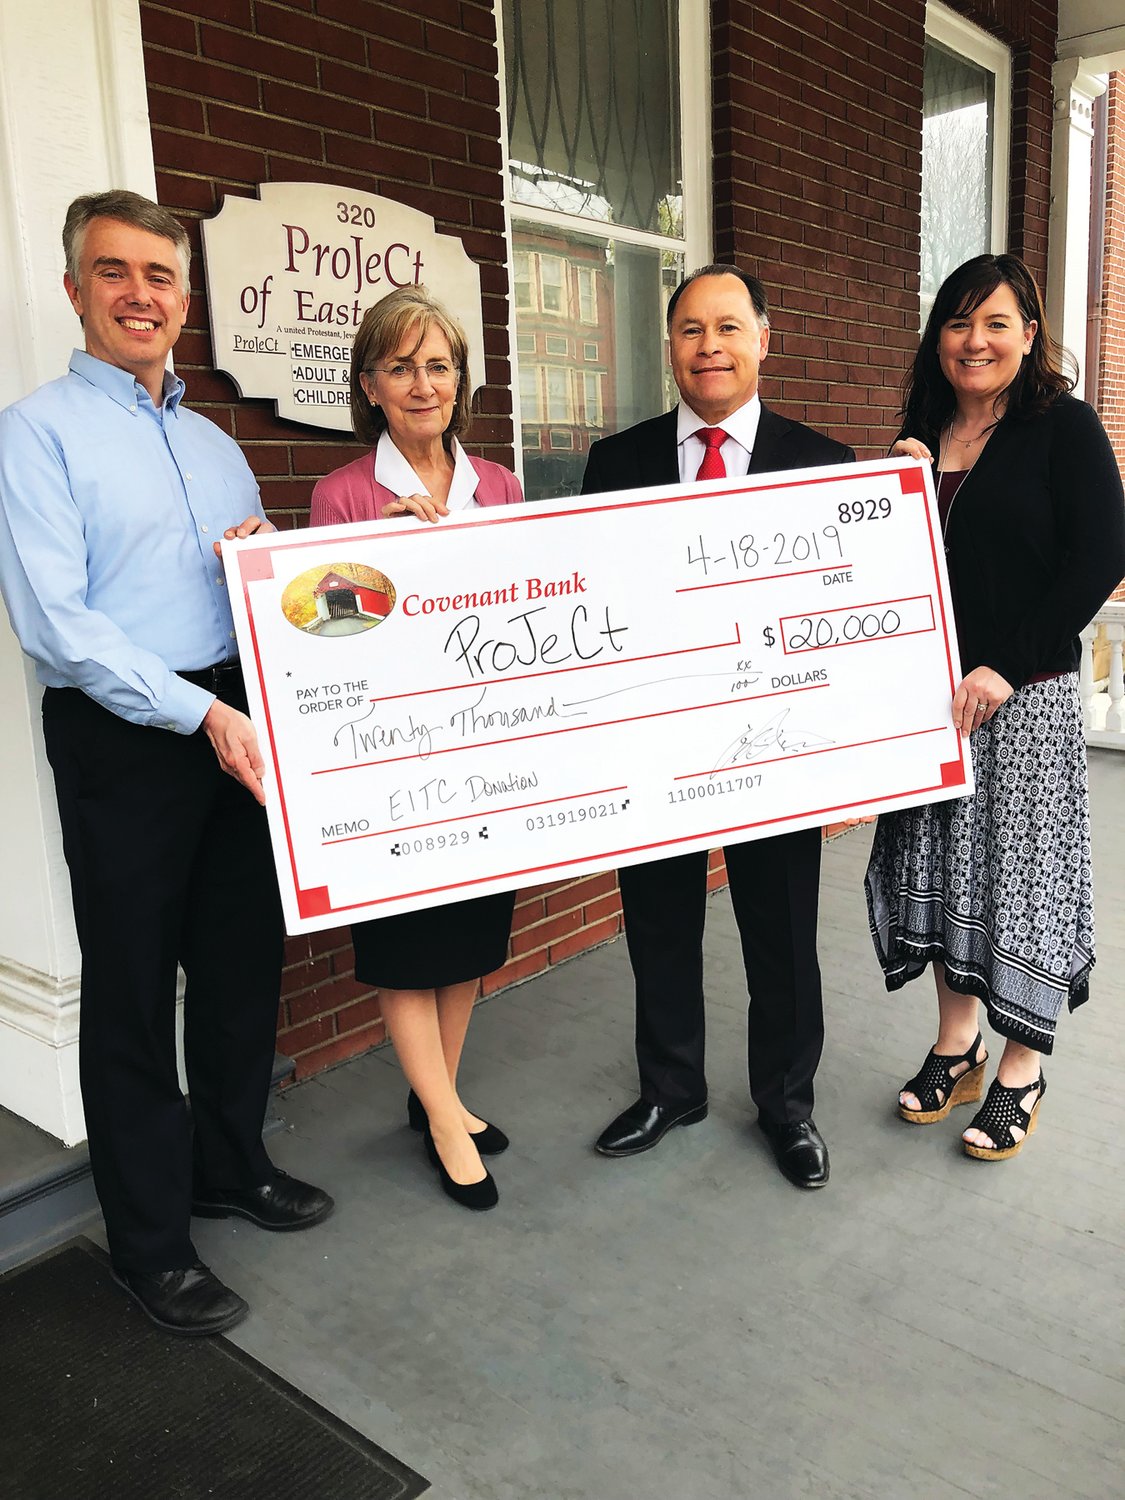 In front of the ProJeCt of Easton administration building, from left, Tom Harper, director of development at ProJeCt, and Janice Komisor, chief executive officer, accept a $20,000 EITC donation from Blair T. Rush, chief operating officer of Covenant Bank; and Eileen Wass, vice president of human resources and marketing.